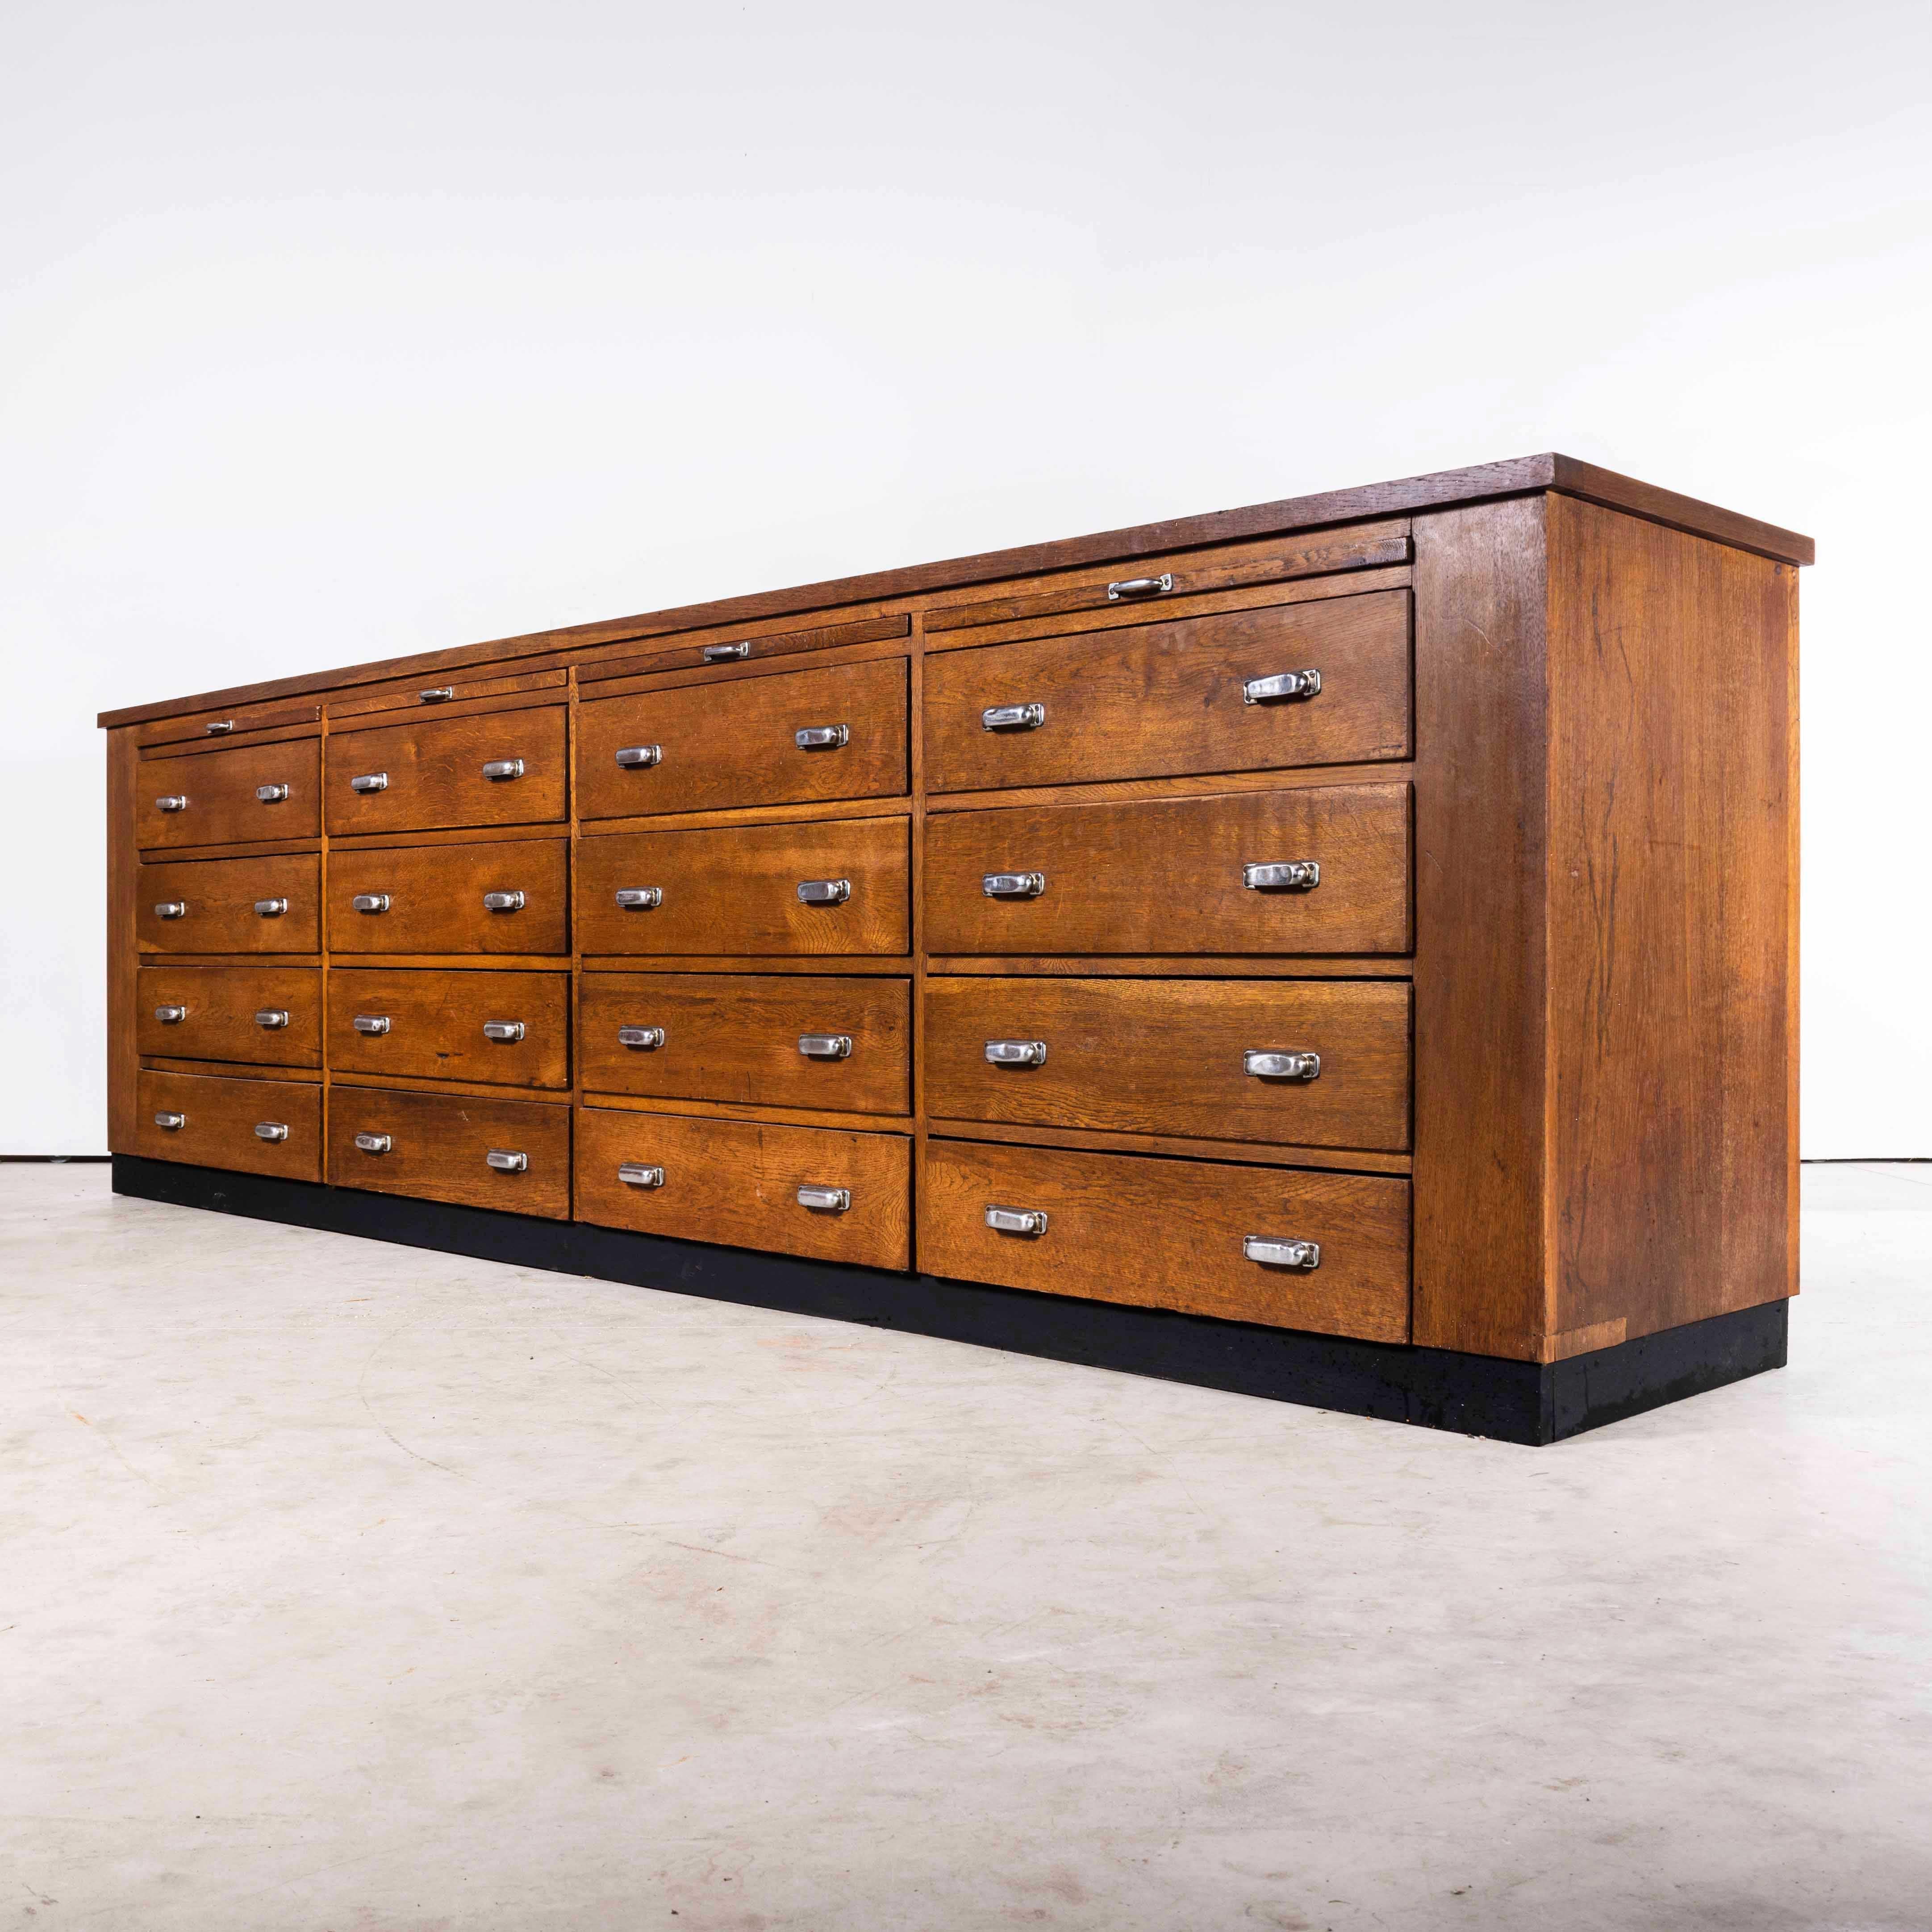 Mid-20th Century 1950's Large Solid Oak Belgian Bank Of Scientific Drawers - Sixteen Drawers